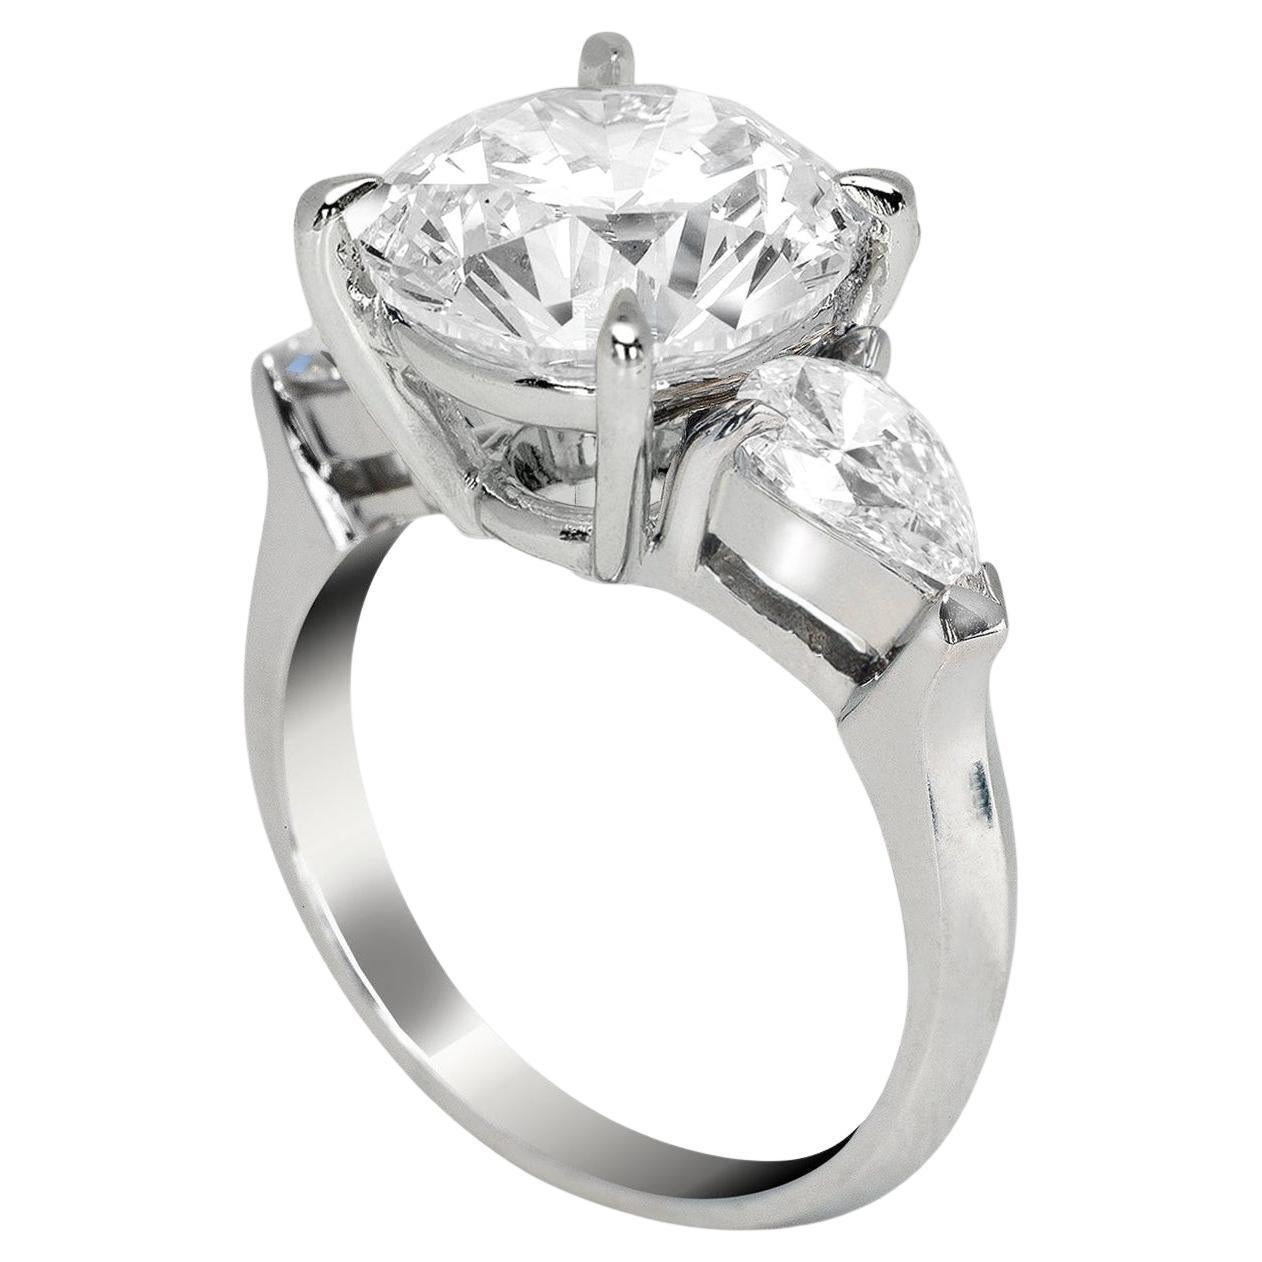 Embrace the unparalleled allure of this exquisite GIA certified 3 carat round cut diamond platinum ring, a symbol of timeless beauty and refined elegance. The centerpiece of this magnificent ring is a breathtaking round cut diamond, meticulously